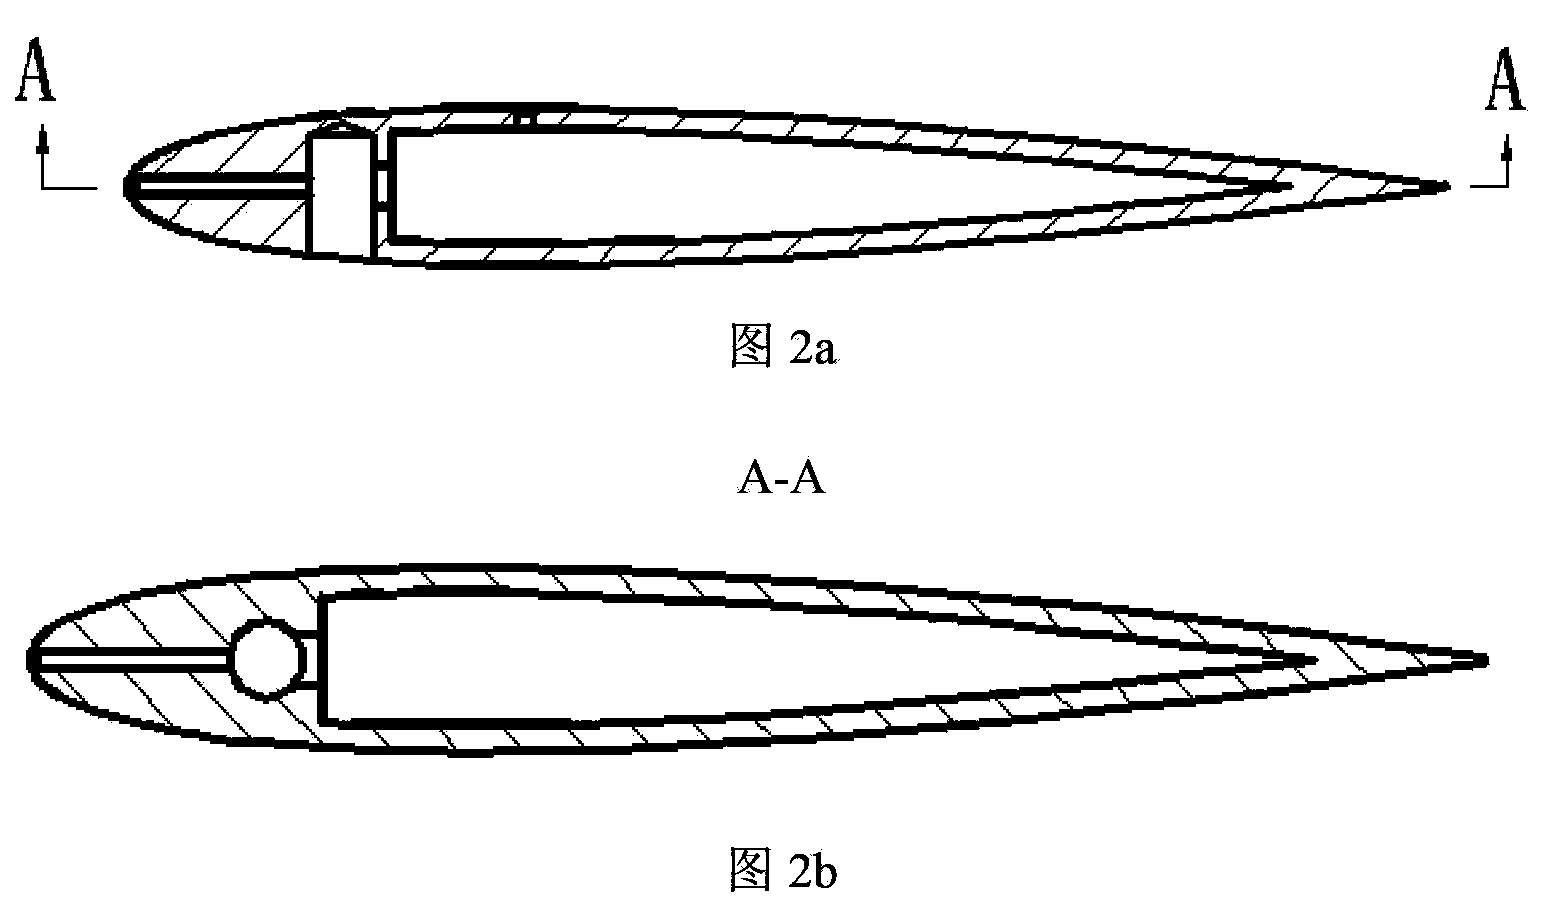 Pressure measurement tail rake for wing section tunnel test